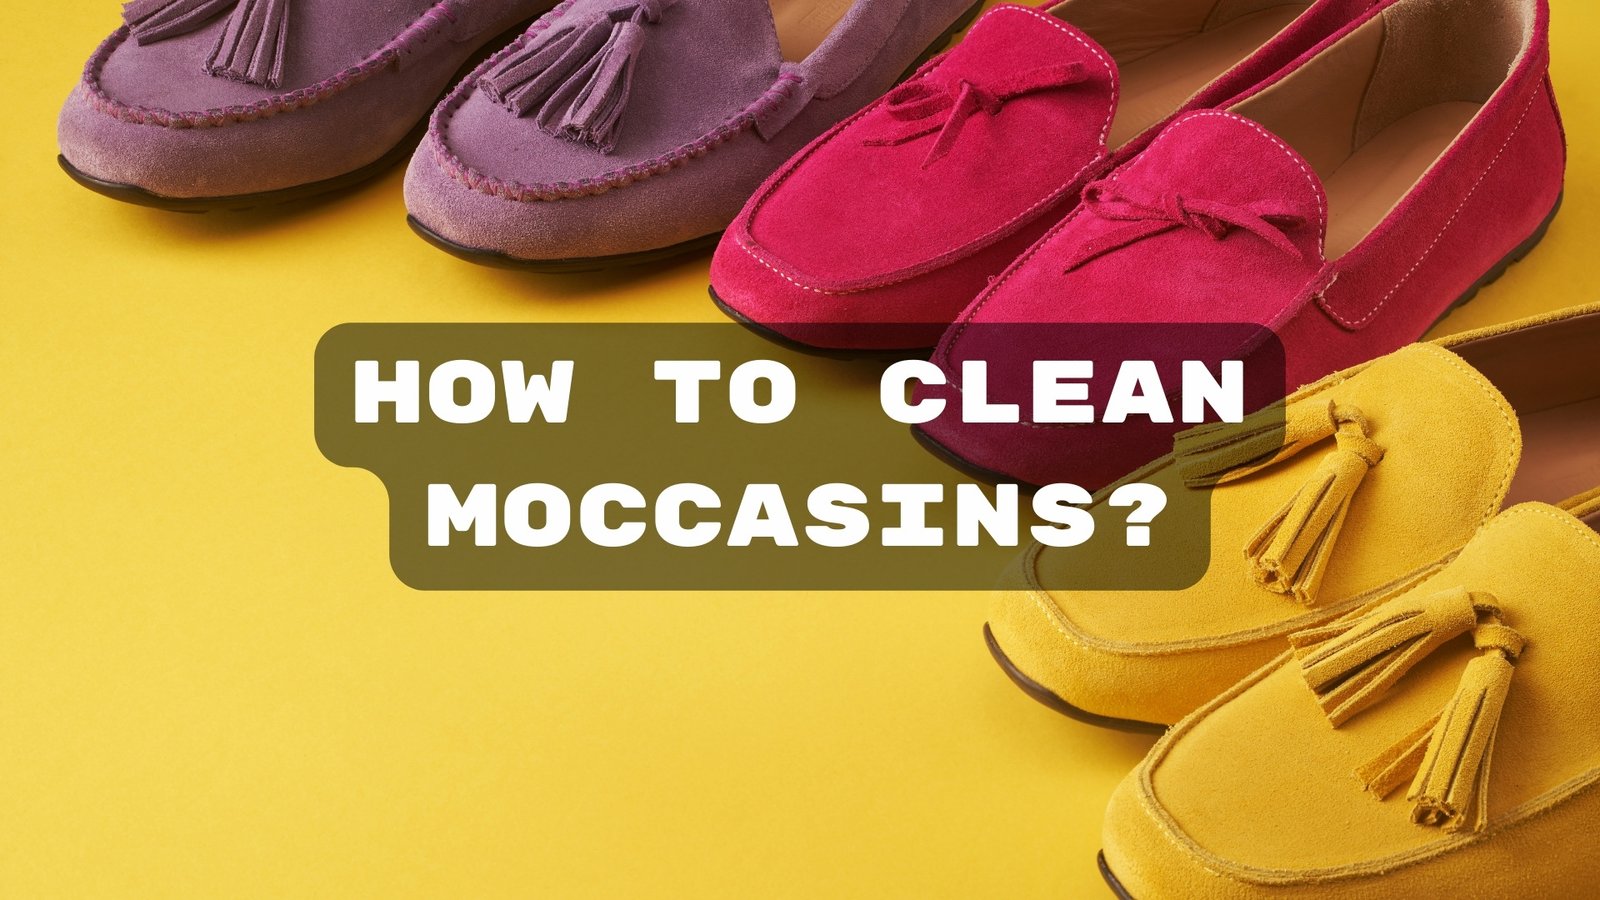 How to clean moccassins?